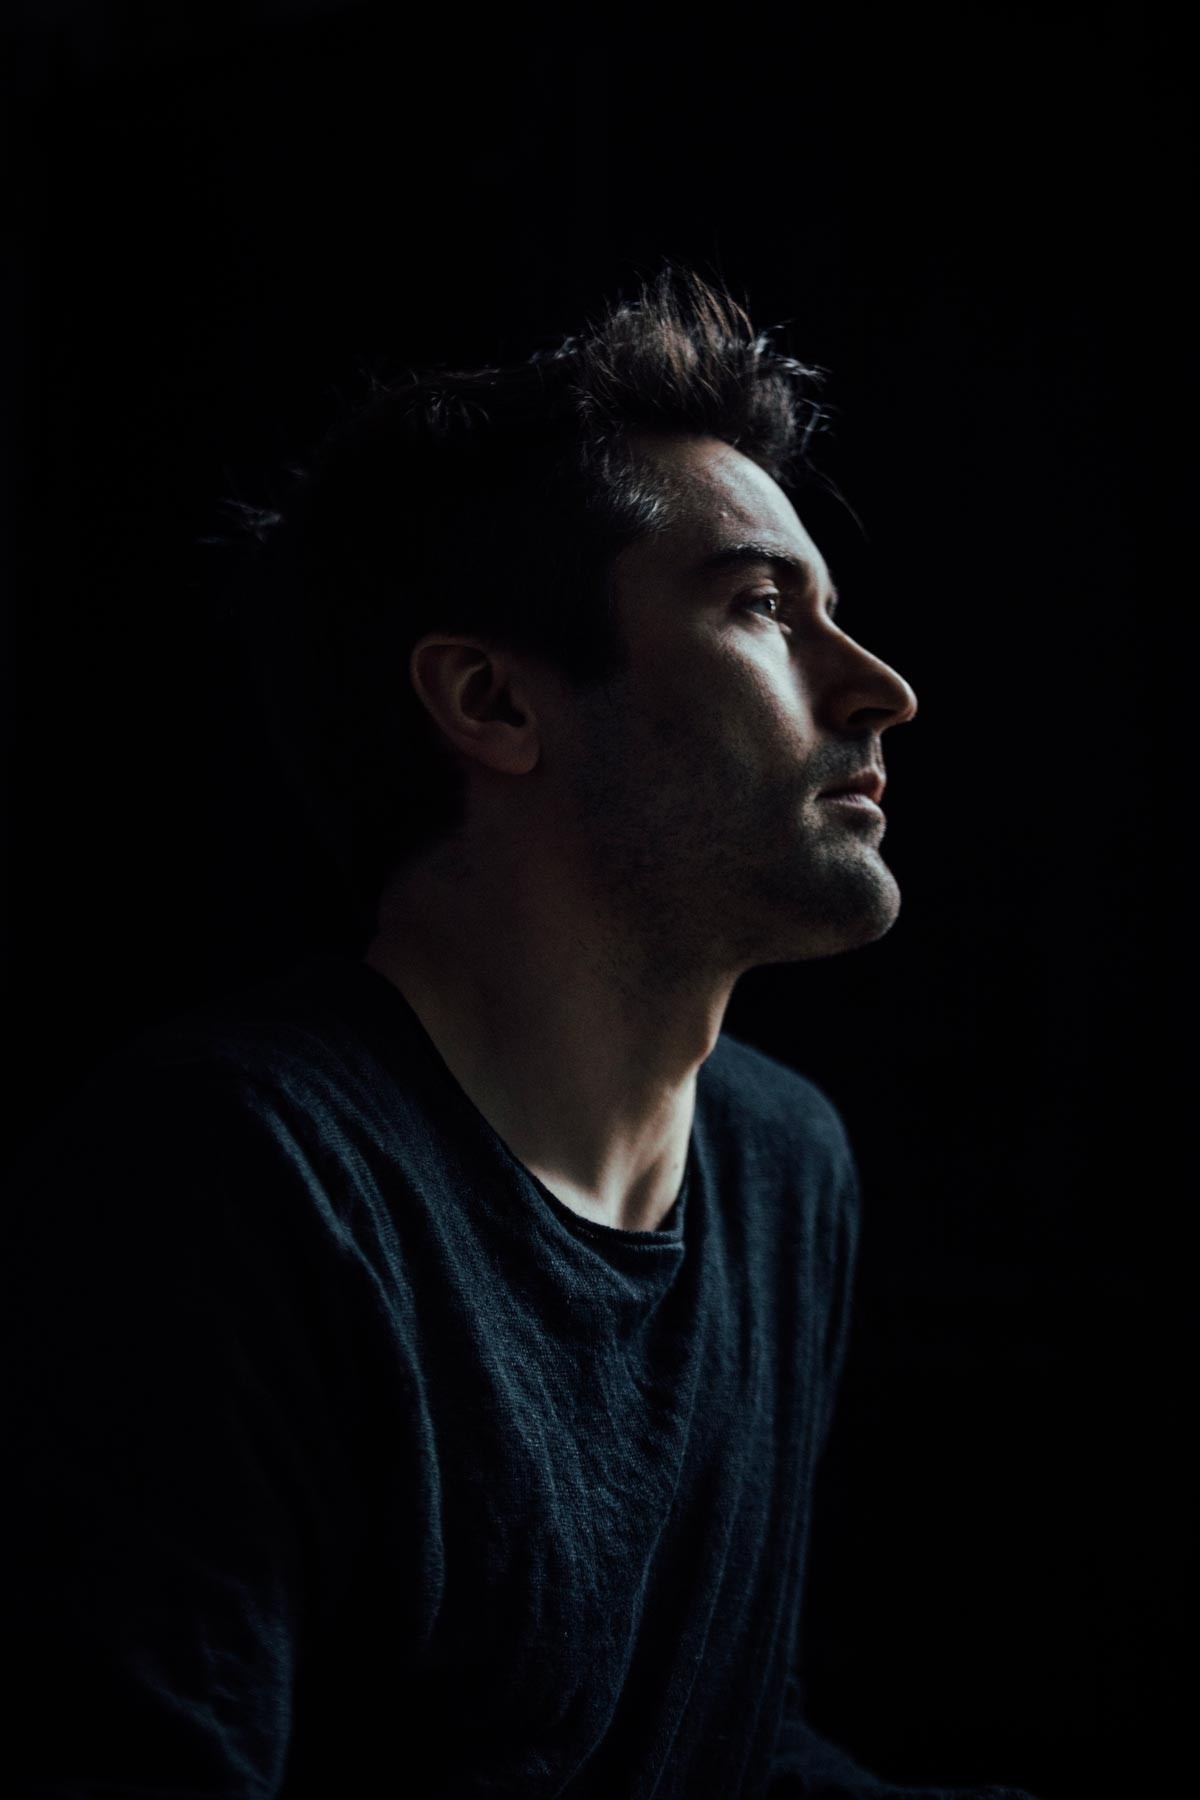 A close-up portrait of pianist Dan Tepfer in a shadowy setting with his face seen in profile in dramatic lighting.